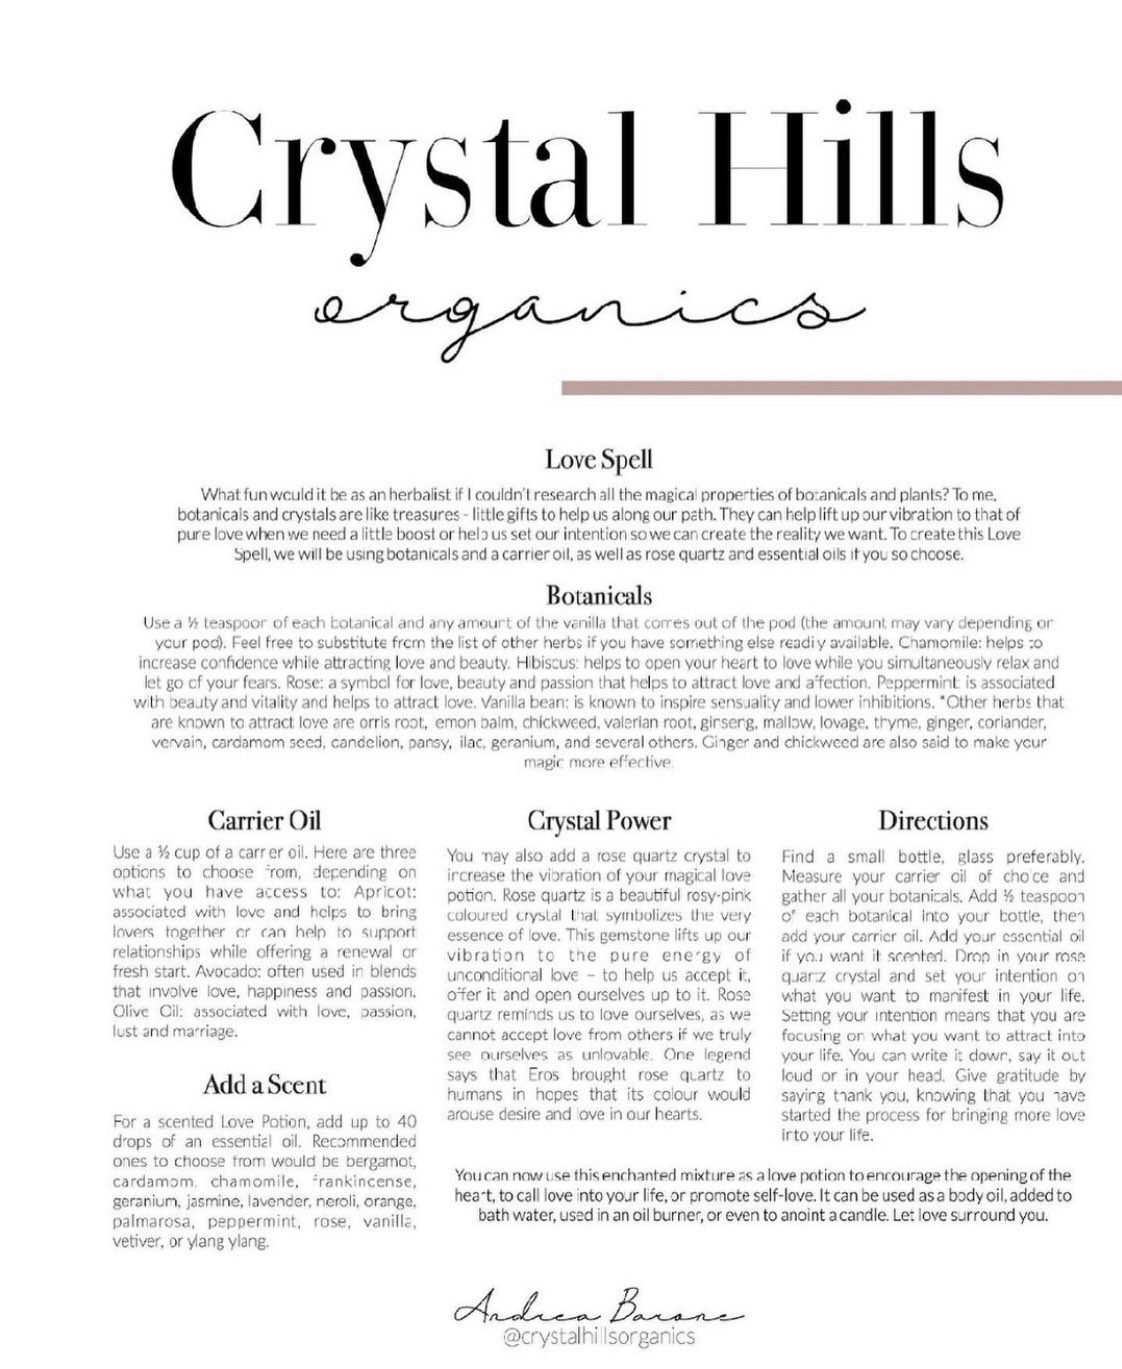 Crystal Hills Organics in Skye Magazine for a Love Spell by Andrea Barone